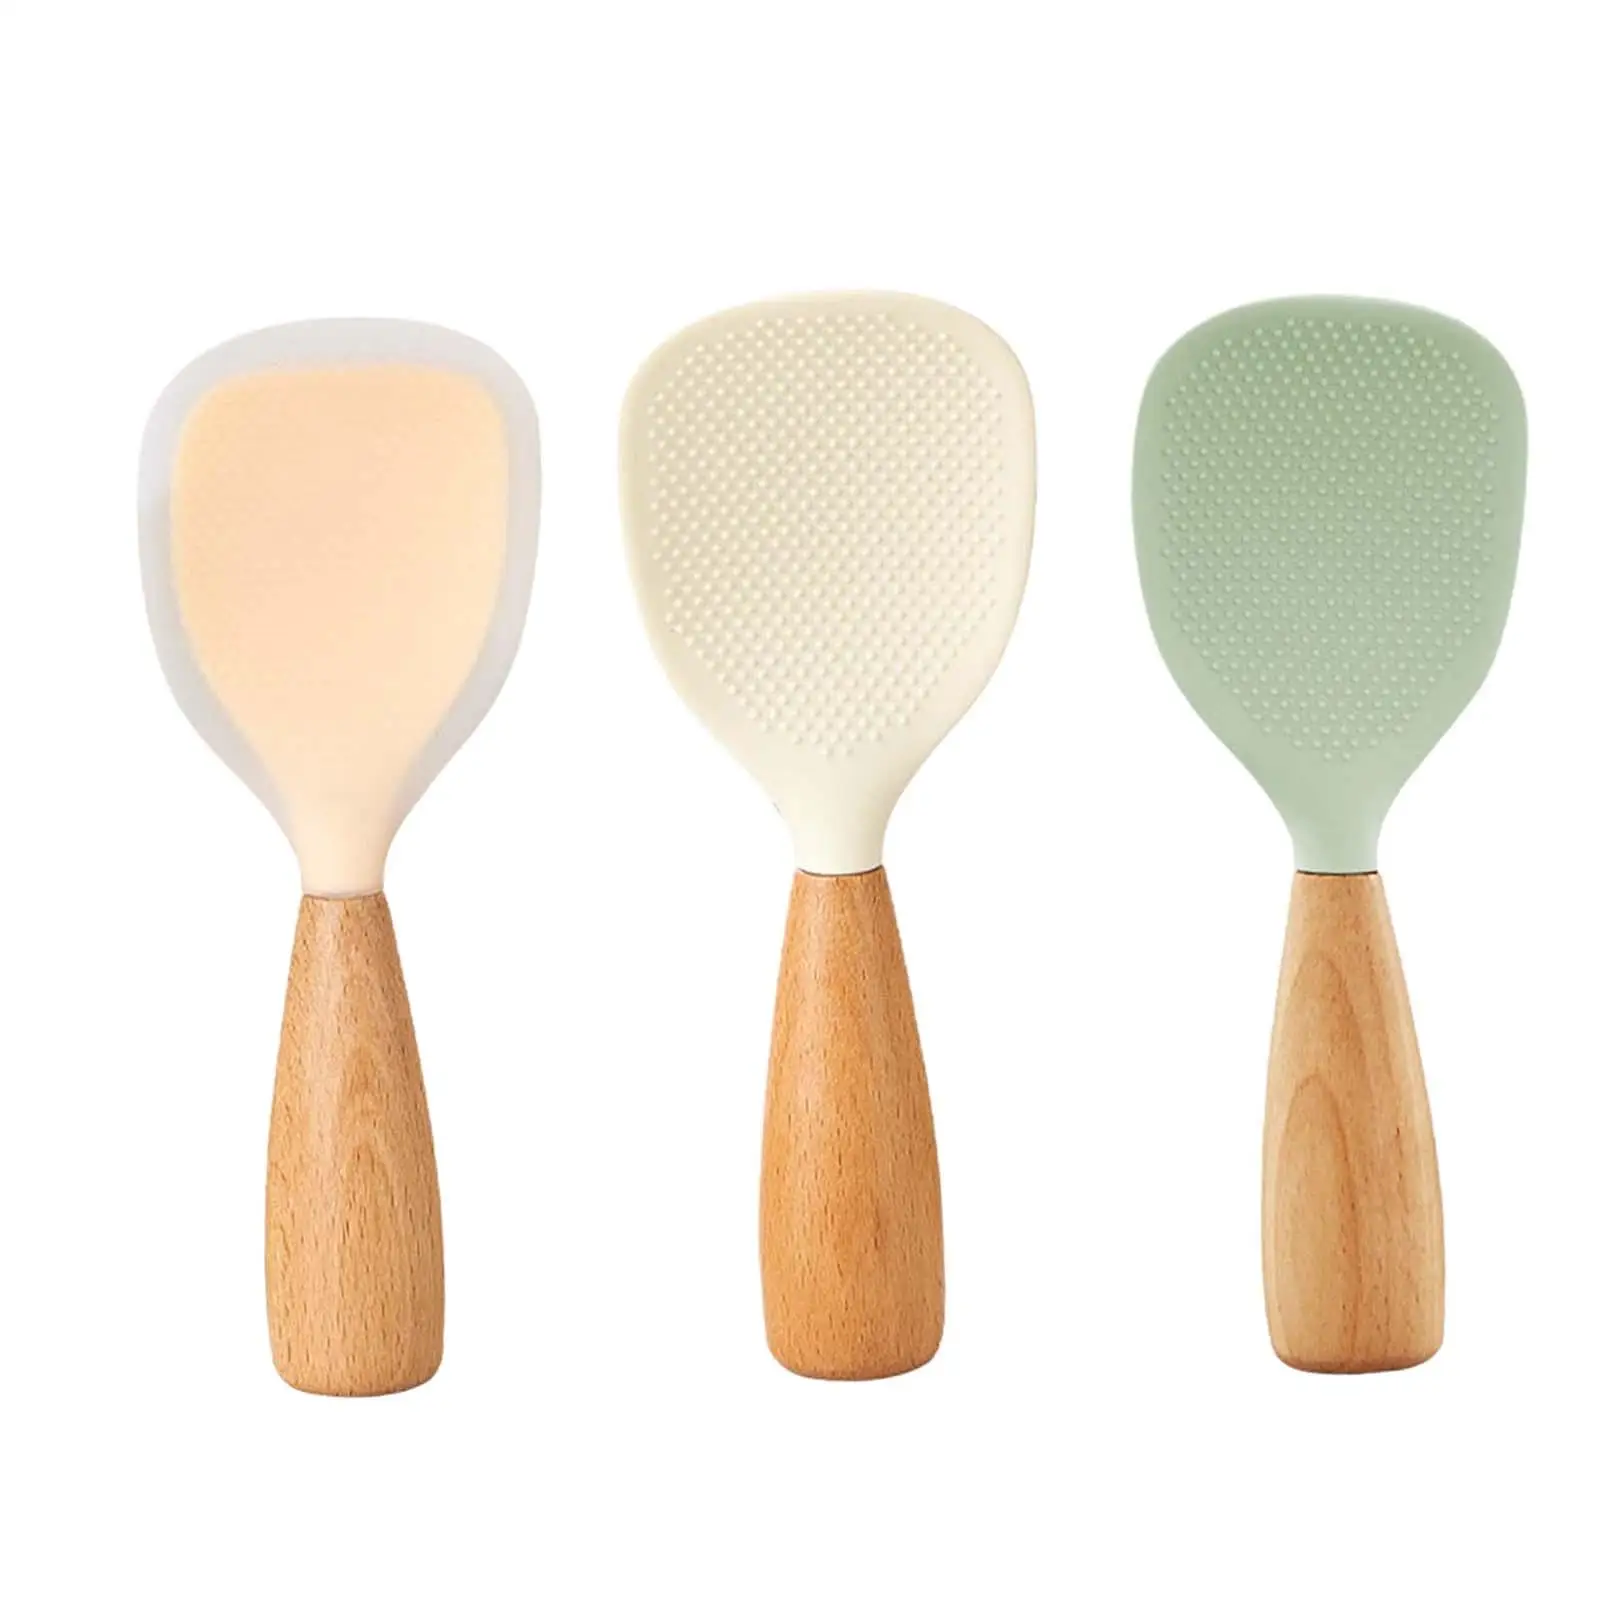 Rice Paddle Multifunction with Wood Handle Reusable Silicone Rice Spoon for Sushi Rice Hotel Home Mashed Potato